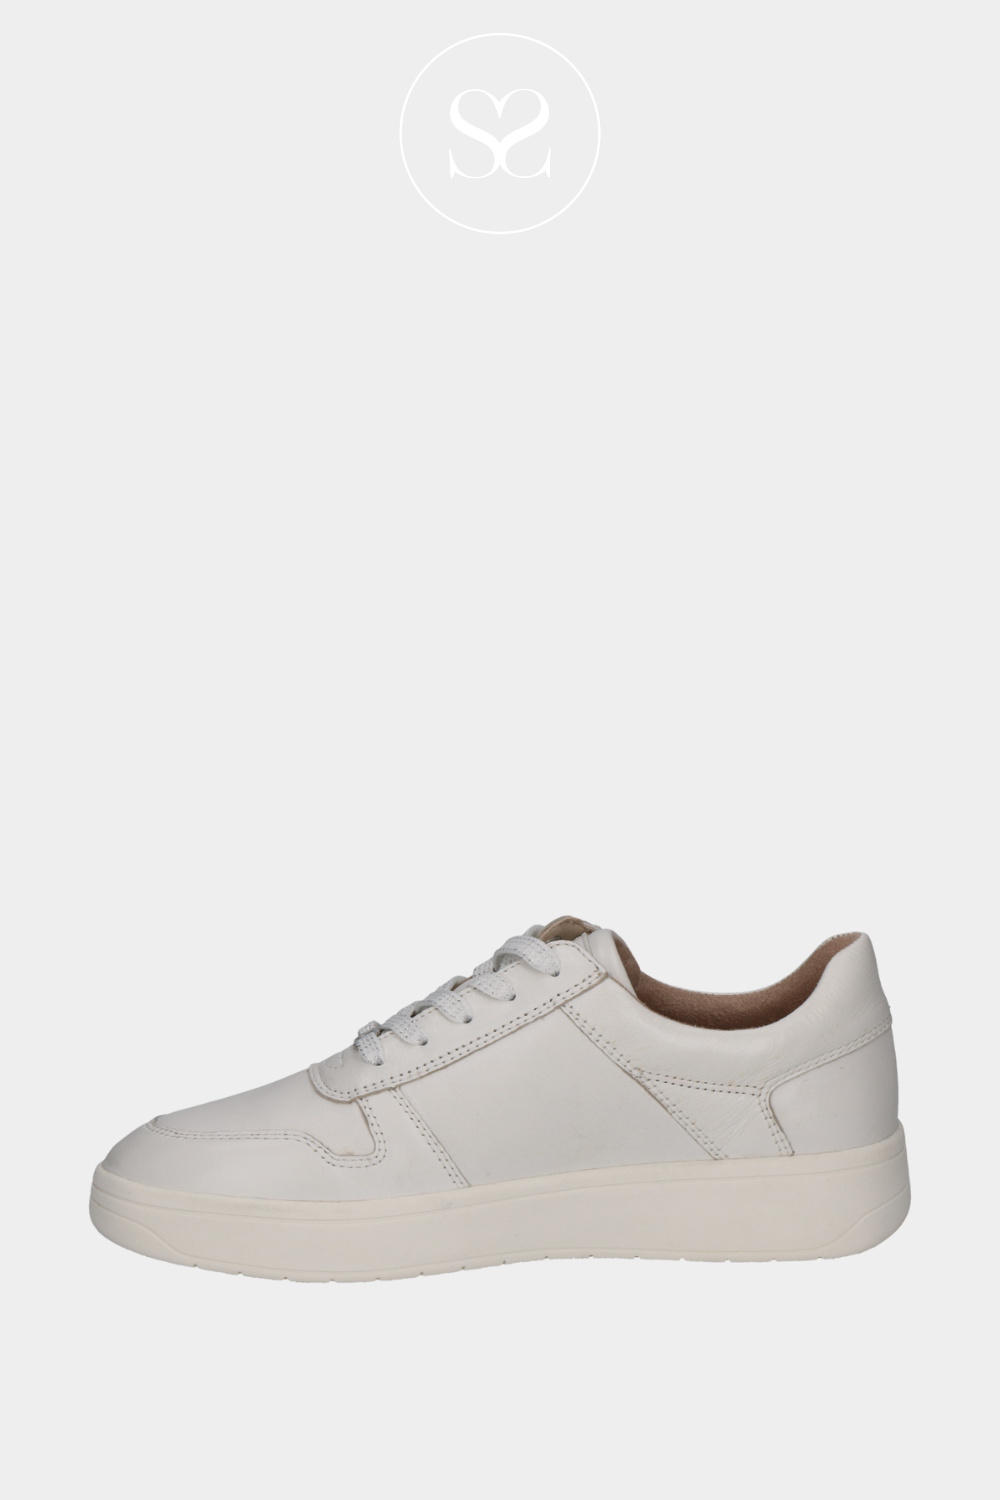 CAPRICE 9-23301-42 WHITE LEATHER TRAINER WITH ZIP AND LACE FASTENING. SIMPLE AND VERSTAILE WALKING TRAINERS